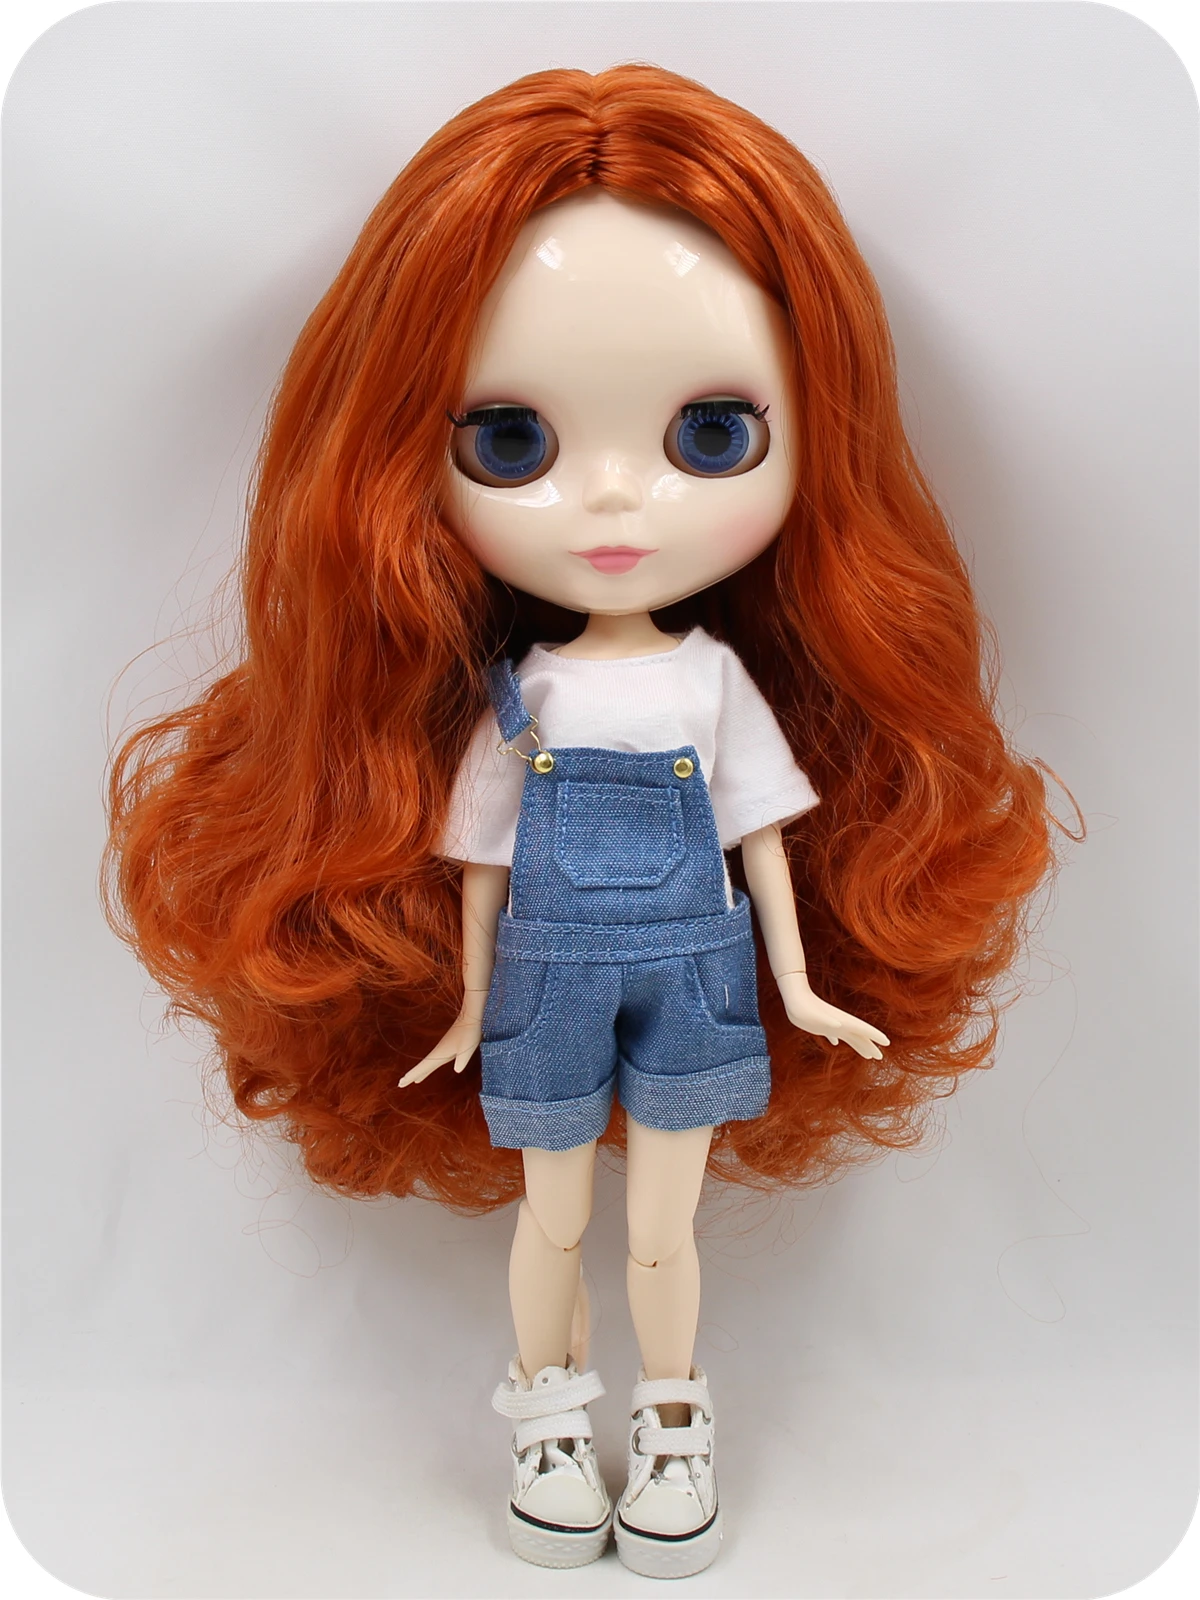 Neo Blythe Doll with Ginger Hair, White Skin, Shiny Face & Jointed Body 1